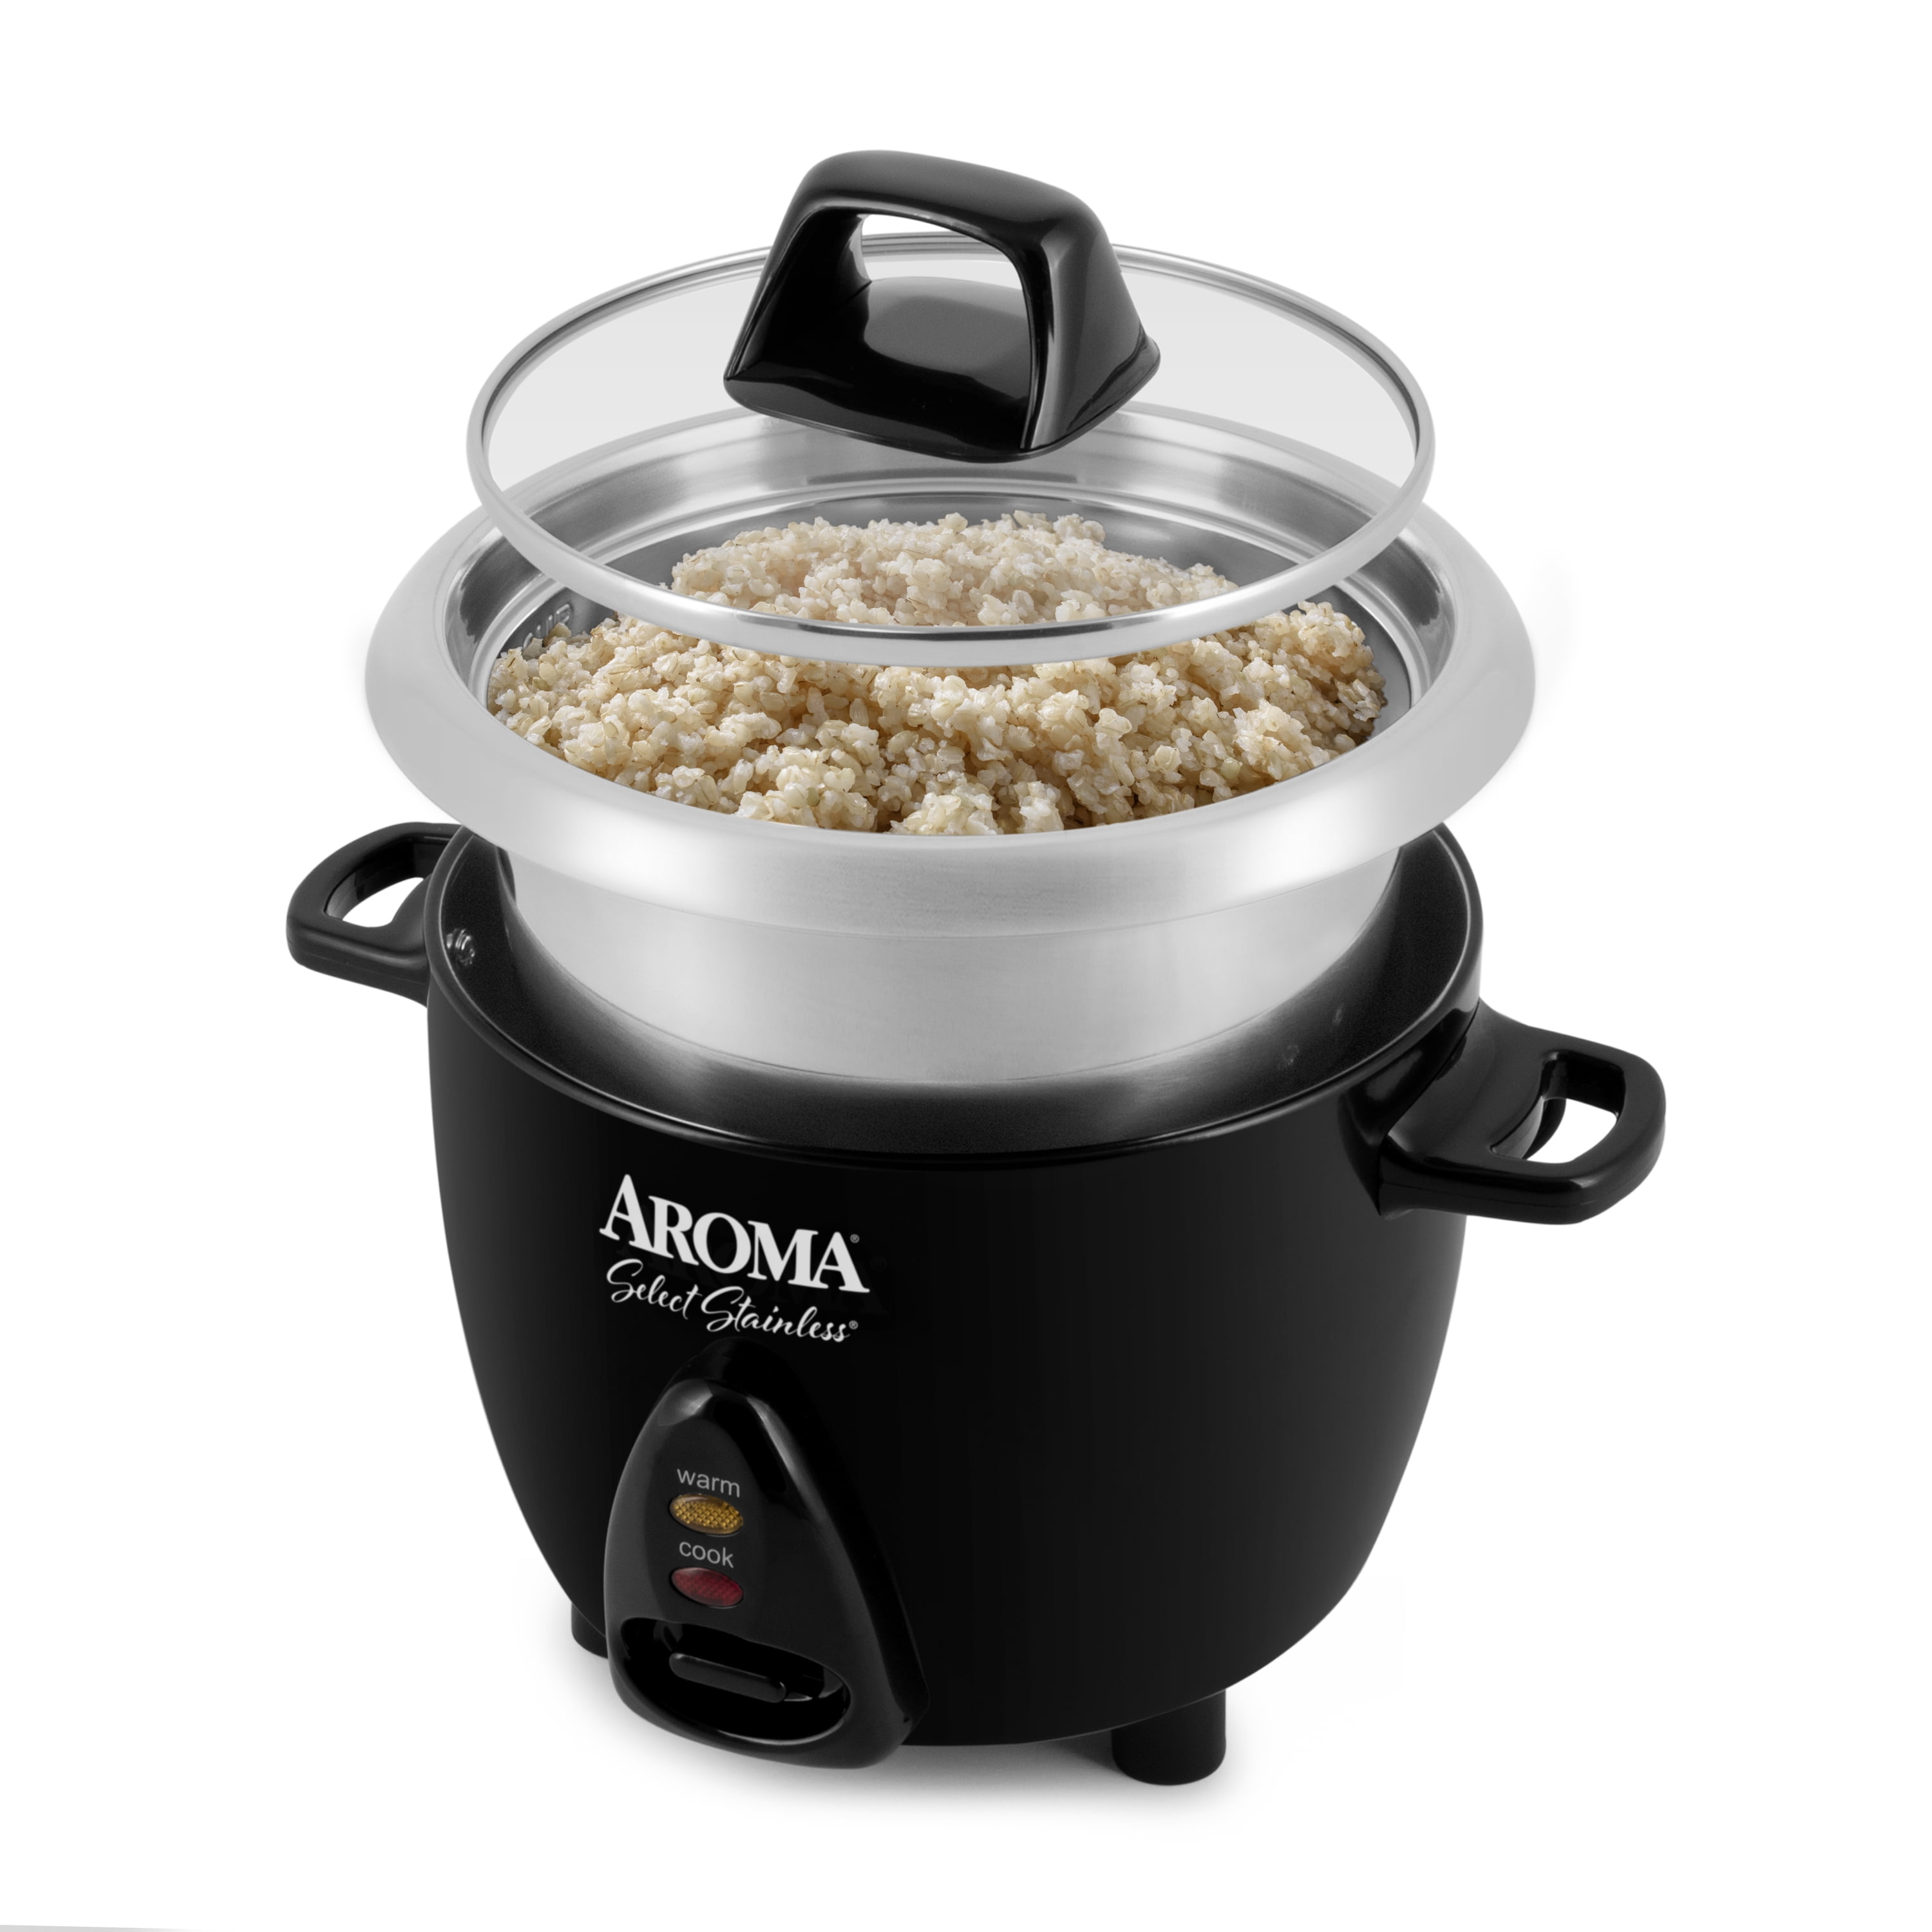 AROMA® 6-Cup (Cooked) / 1.2Qt. Select Stainless® Rice & Grain Cooker,  Black, New, ARC-753SGB